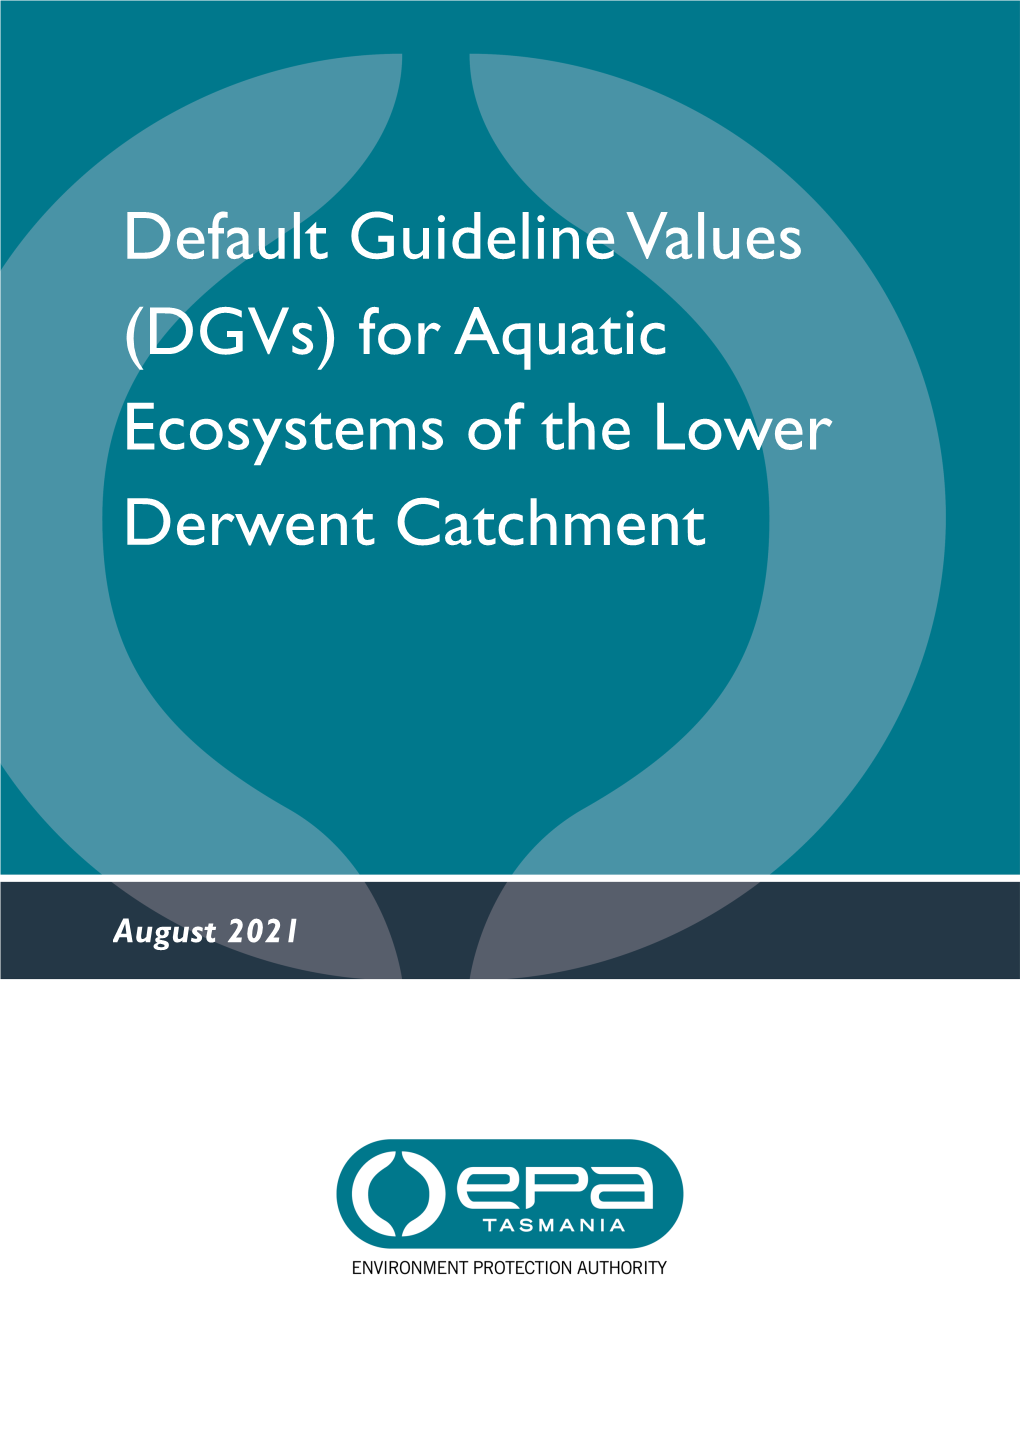 Dgvs for Aquatic Ecosystems of the Lower Derwent Catchment